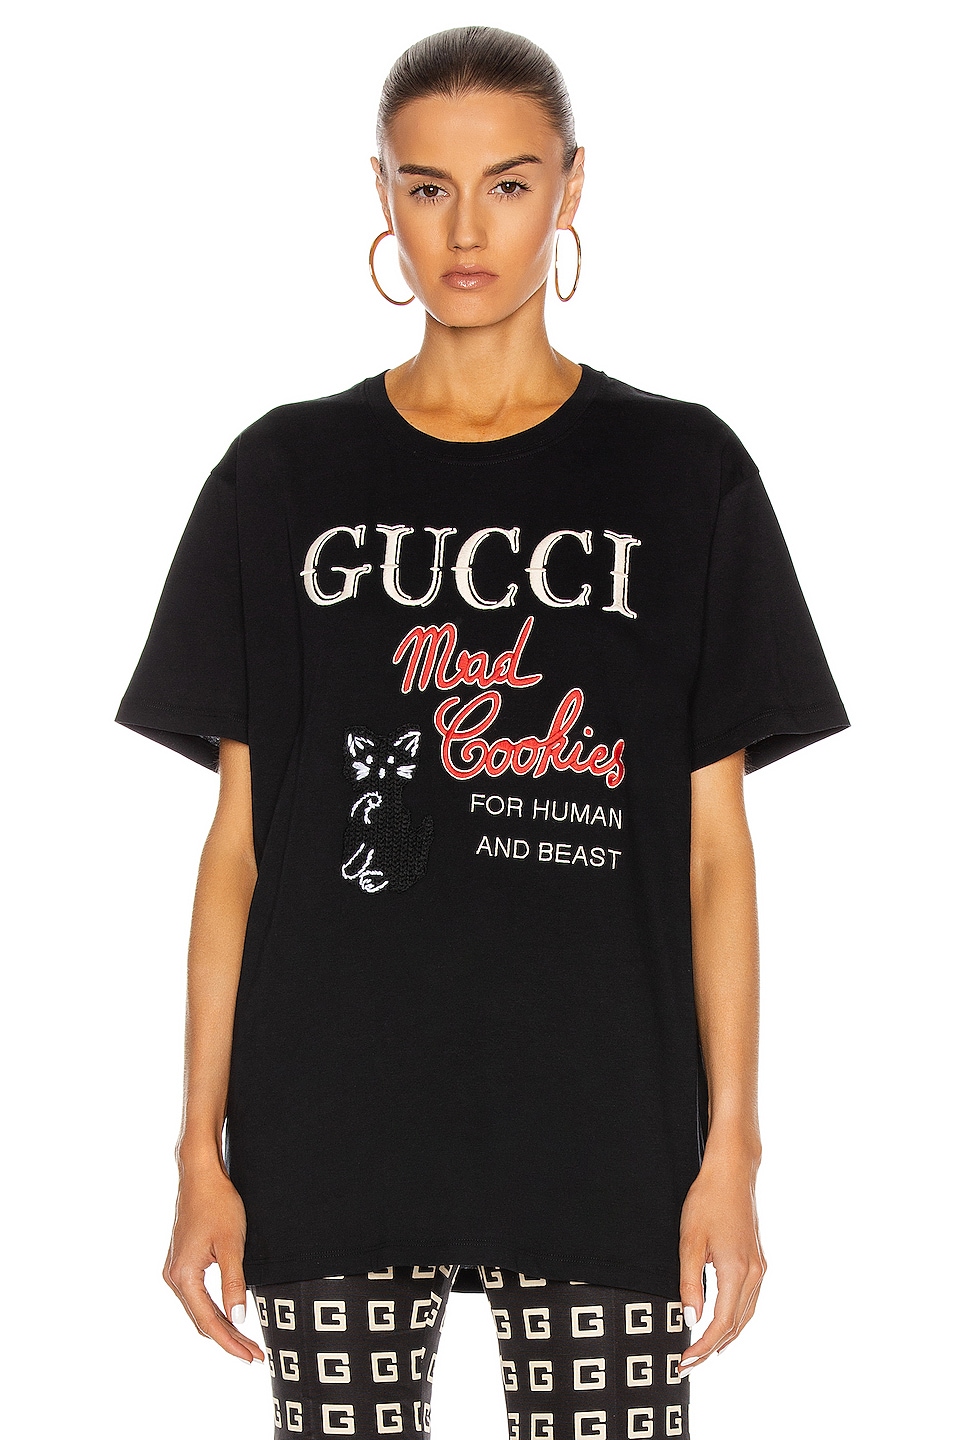 Gucci Mad Cookies Embroidered T Shirt in Black | FWRD